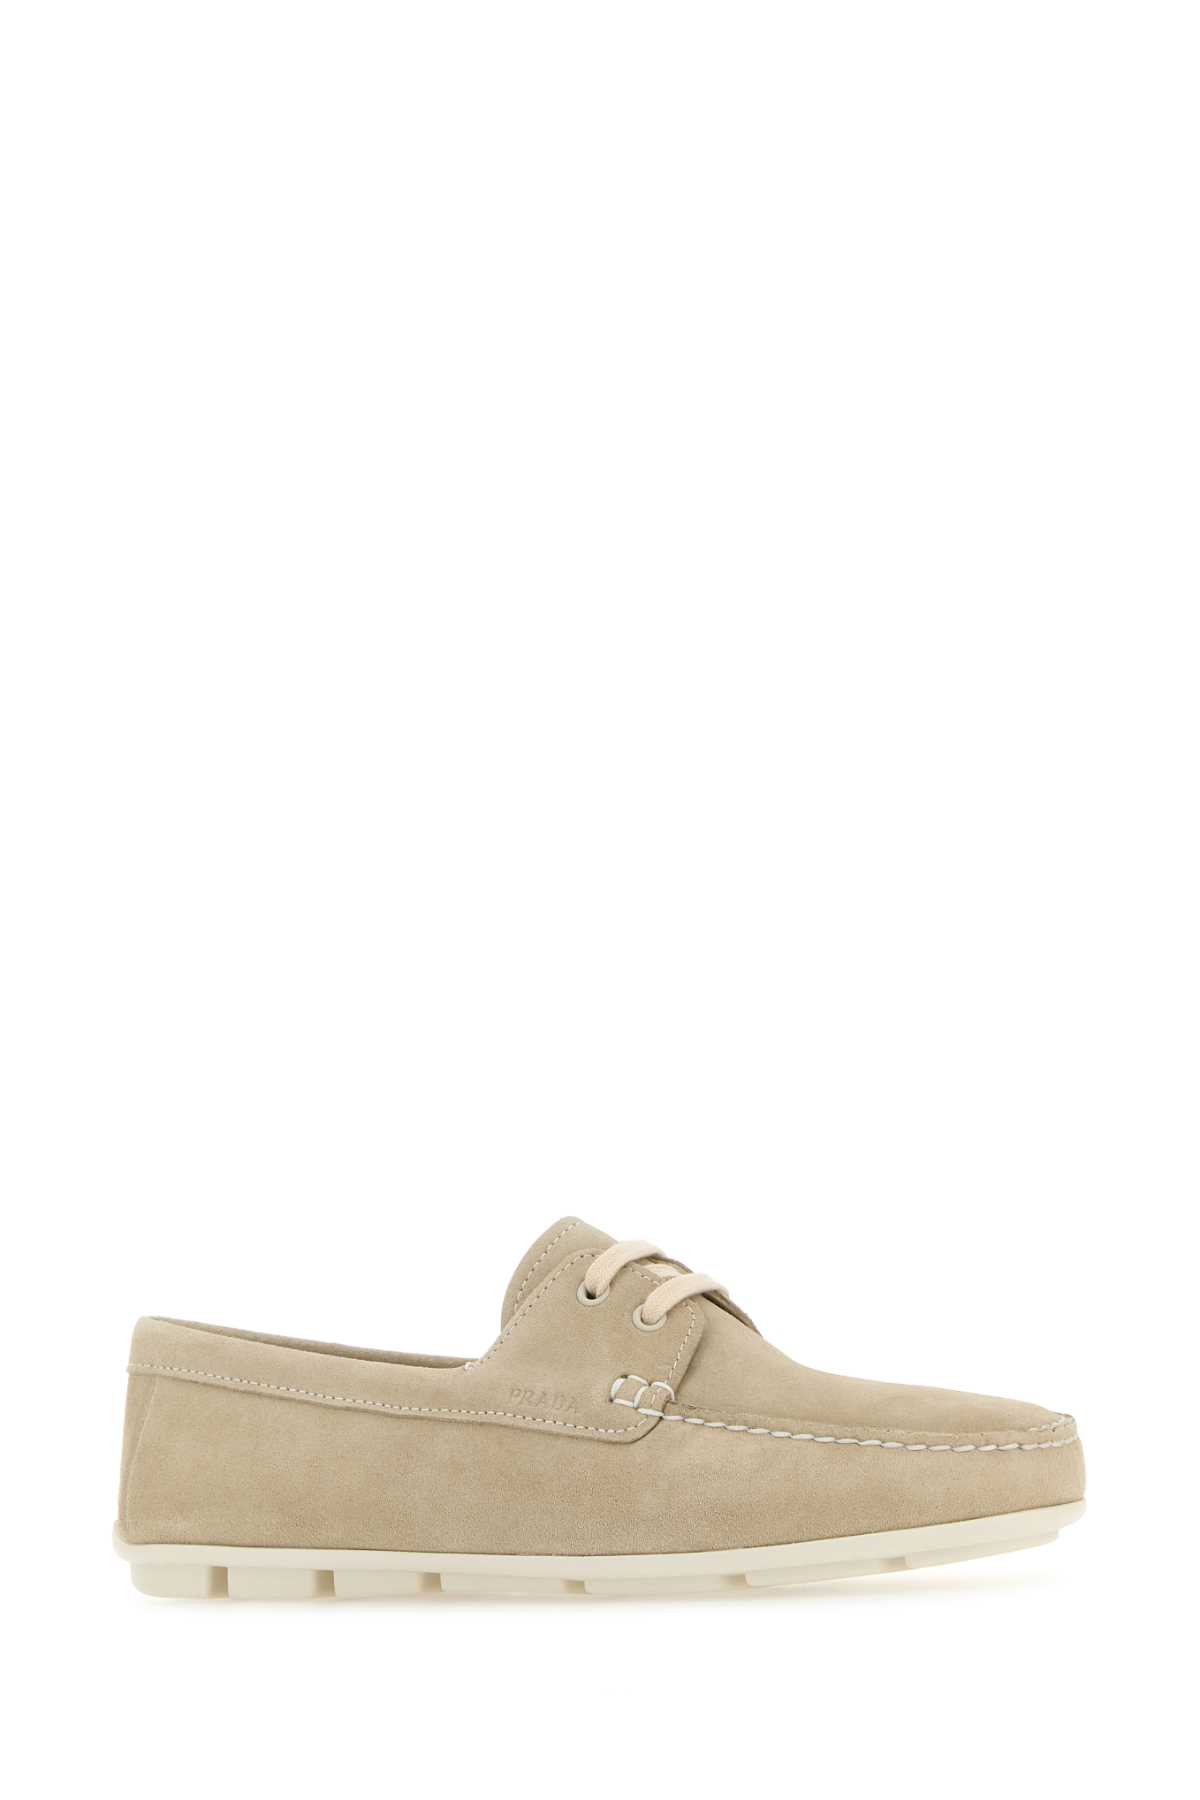 Shop Prada Sand Suede Driver Loafers In Pomice